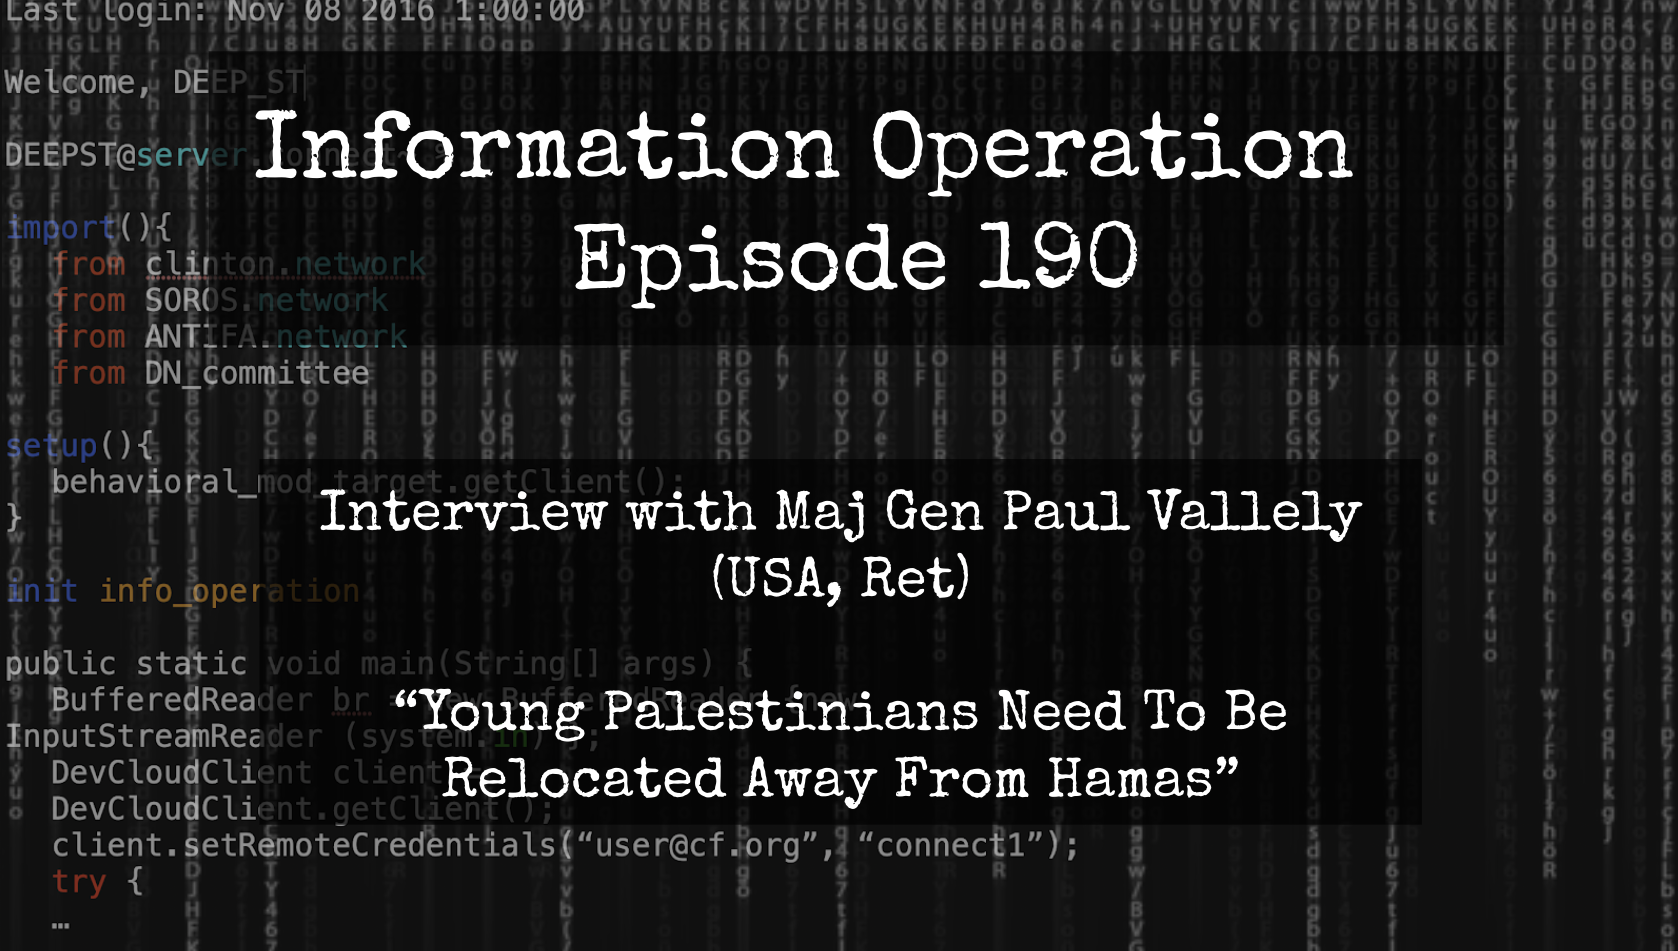 LIVE 7pm EST: IO Episode 190 - Gen Paul Vallely On Relocating Palestinians Away From Hamas